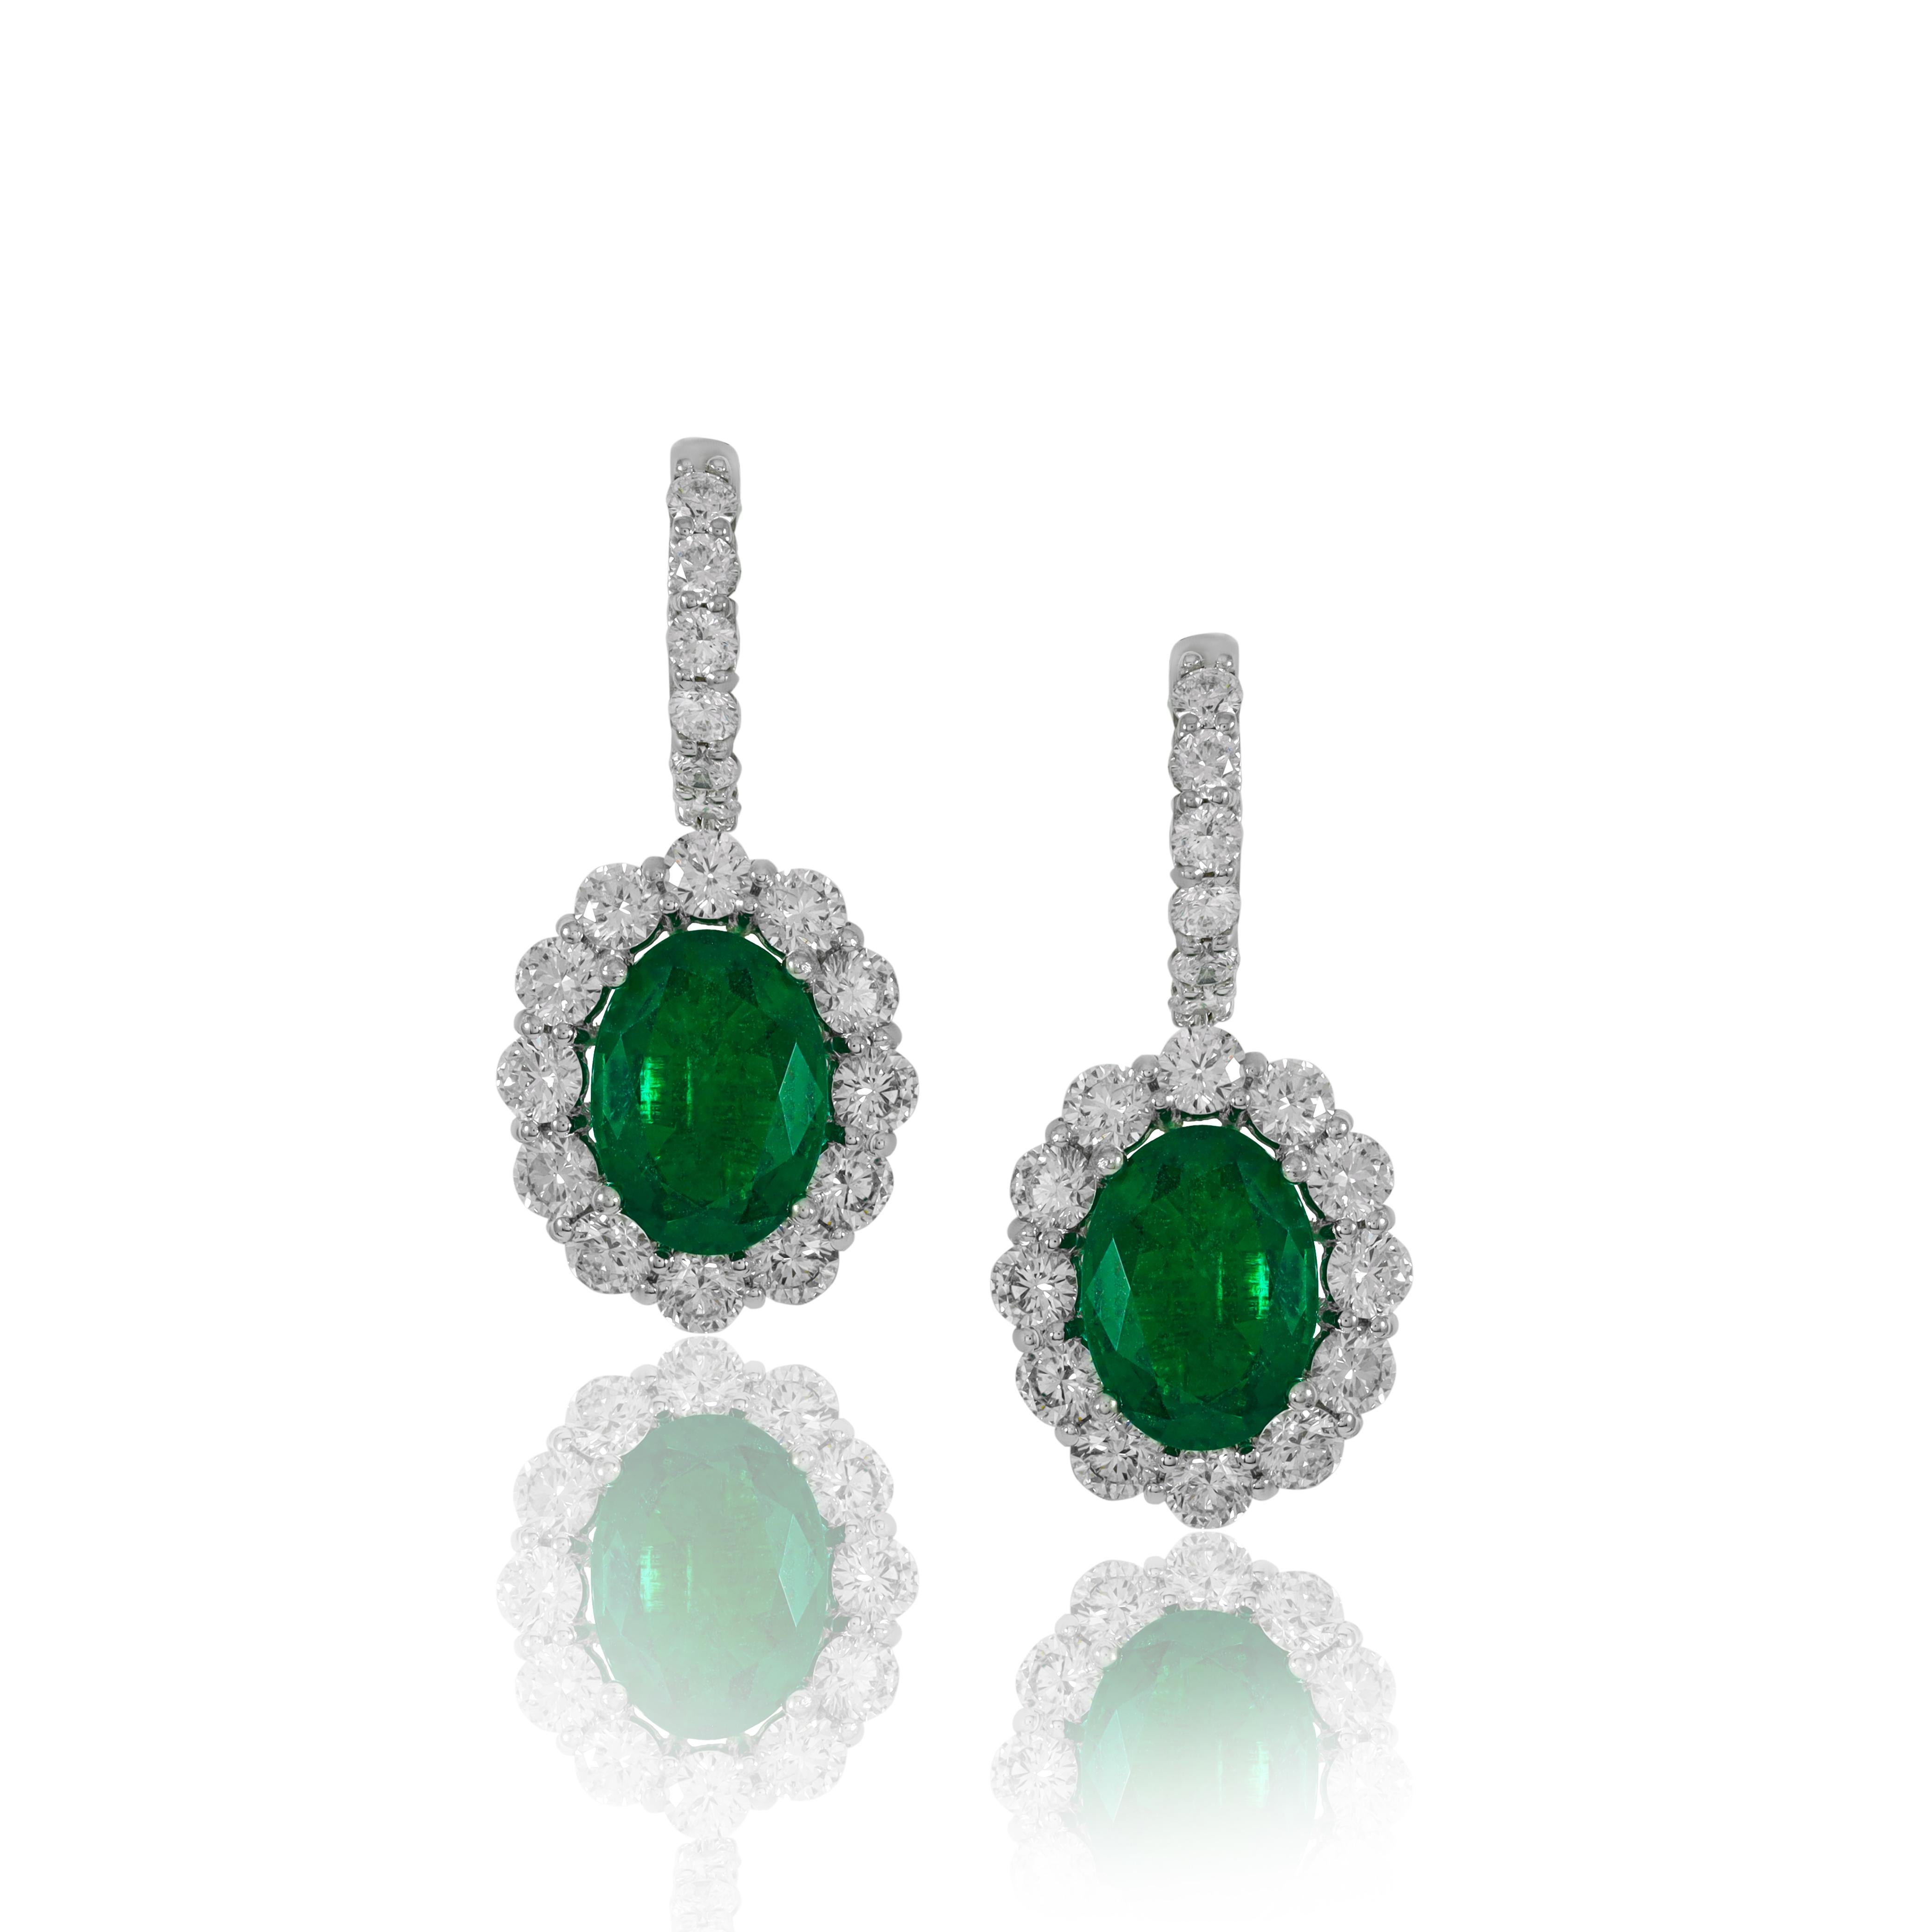 6.36 Ct Emerald Ovals Surrounded By 4.75 Ct Round Diamonds Creating A Flower Earring Set In 18 Kt W/g
C.dunaigre
